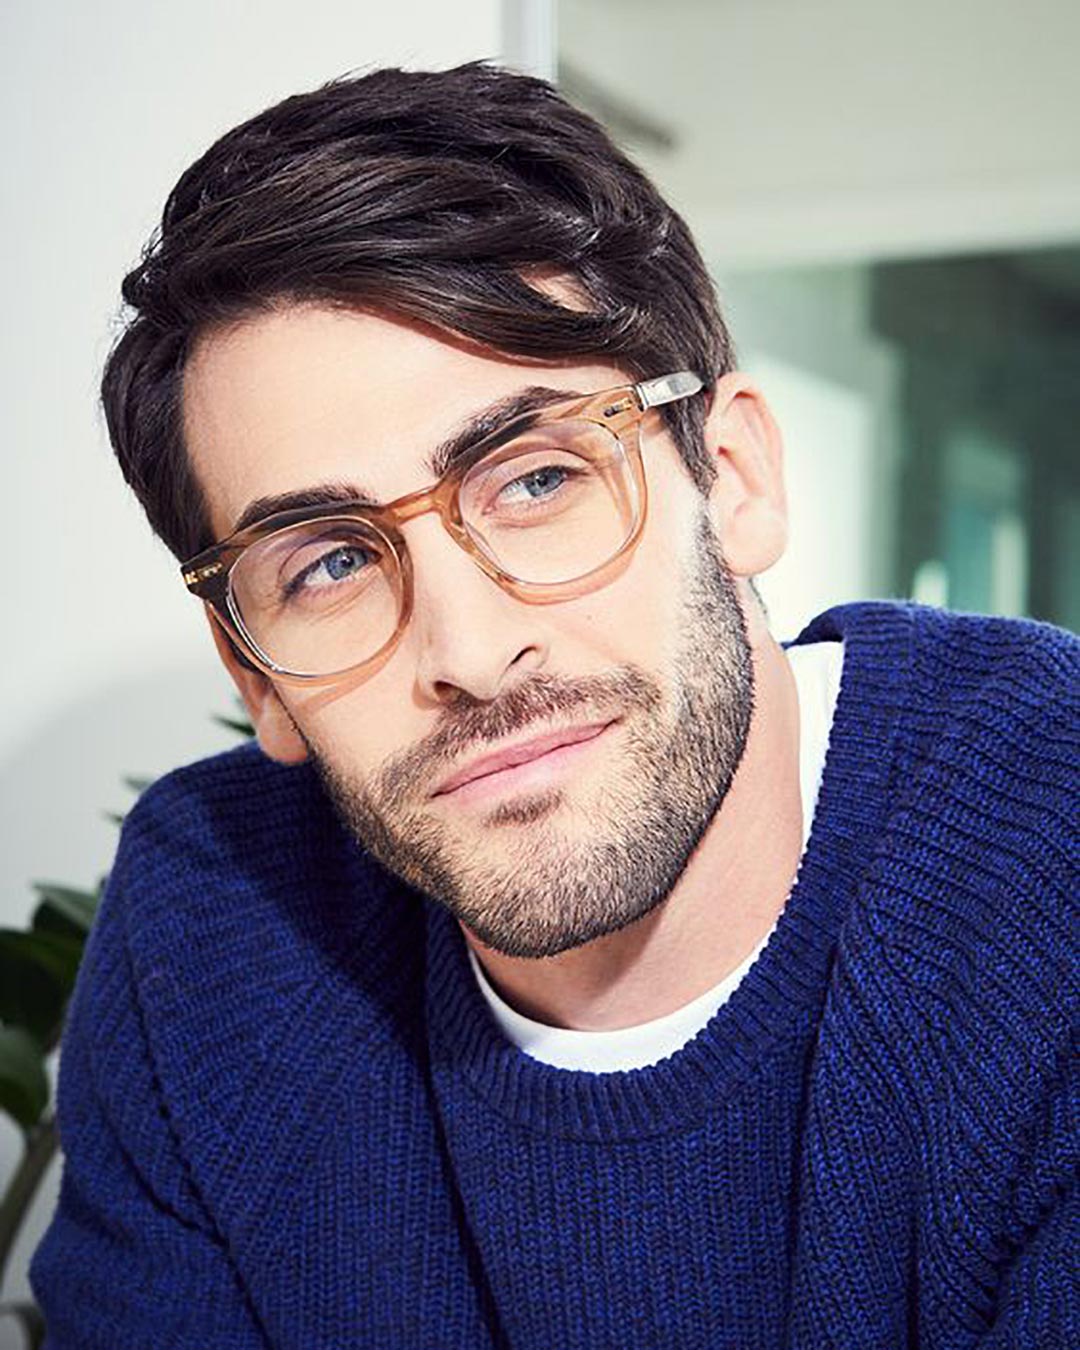 Bearded man with dark hair and blue jumper wearing chunky Wayfarer spectacles frame